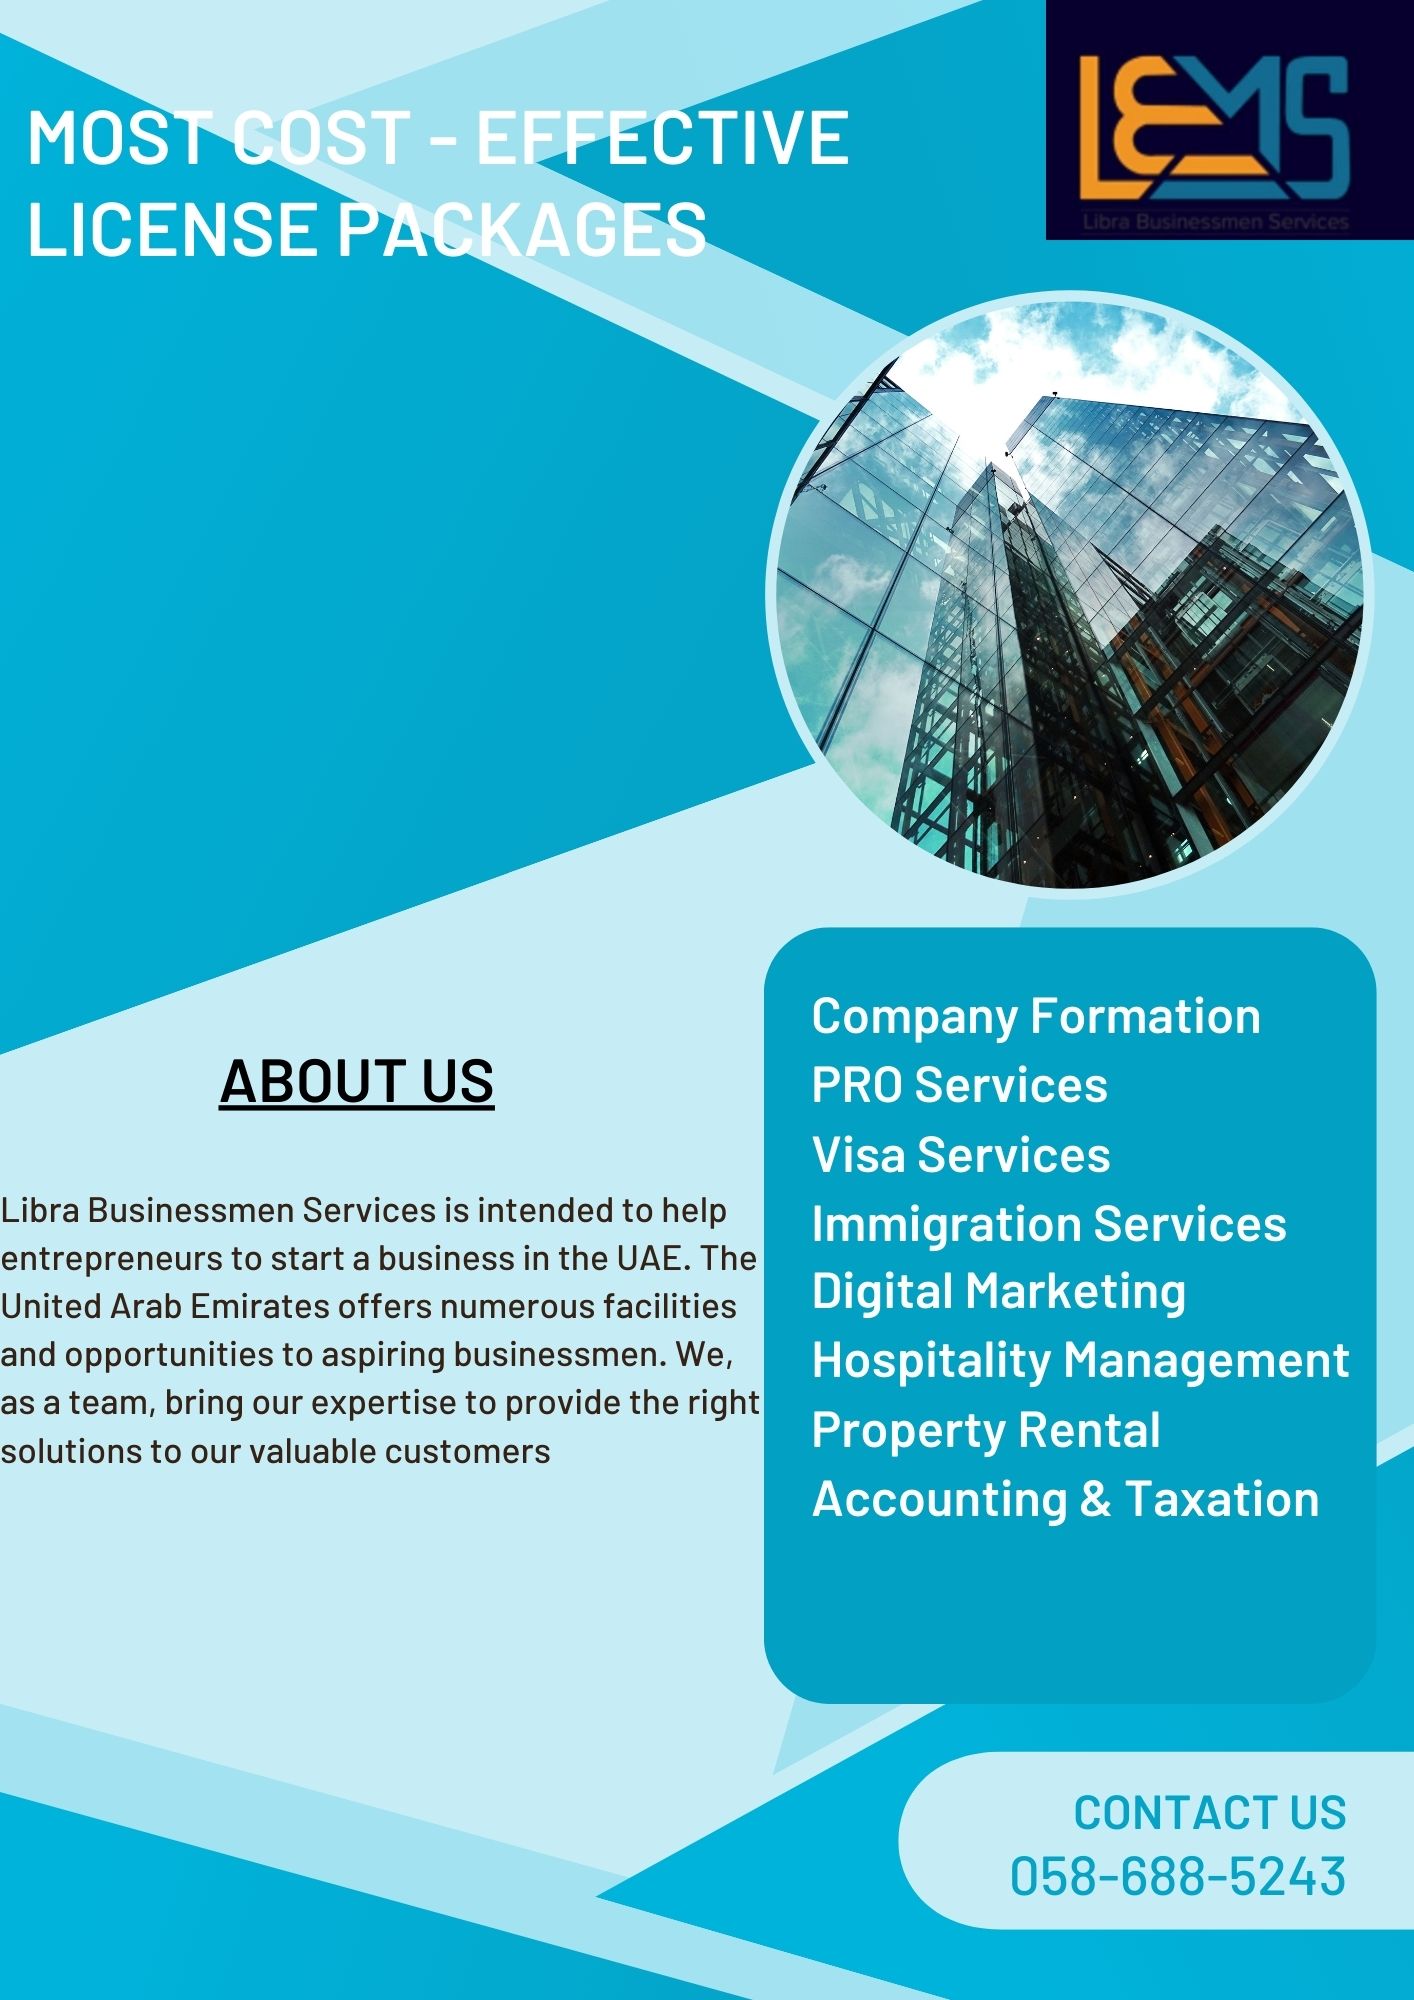 Setup Your Business Today in Dubai